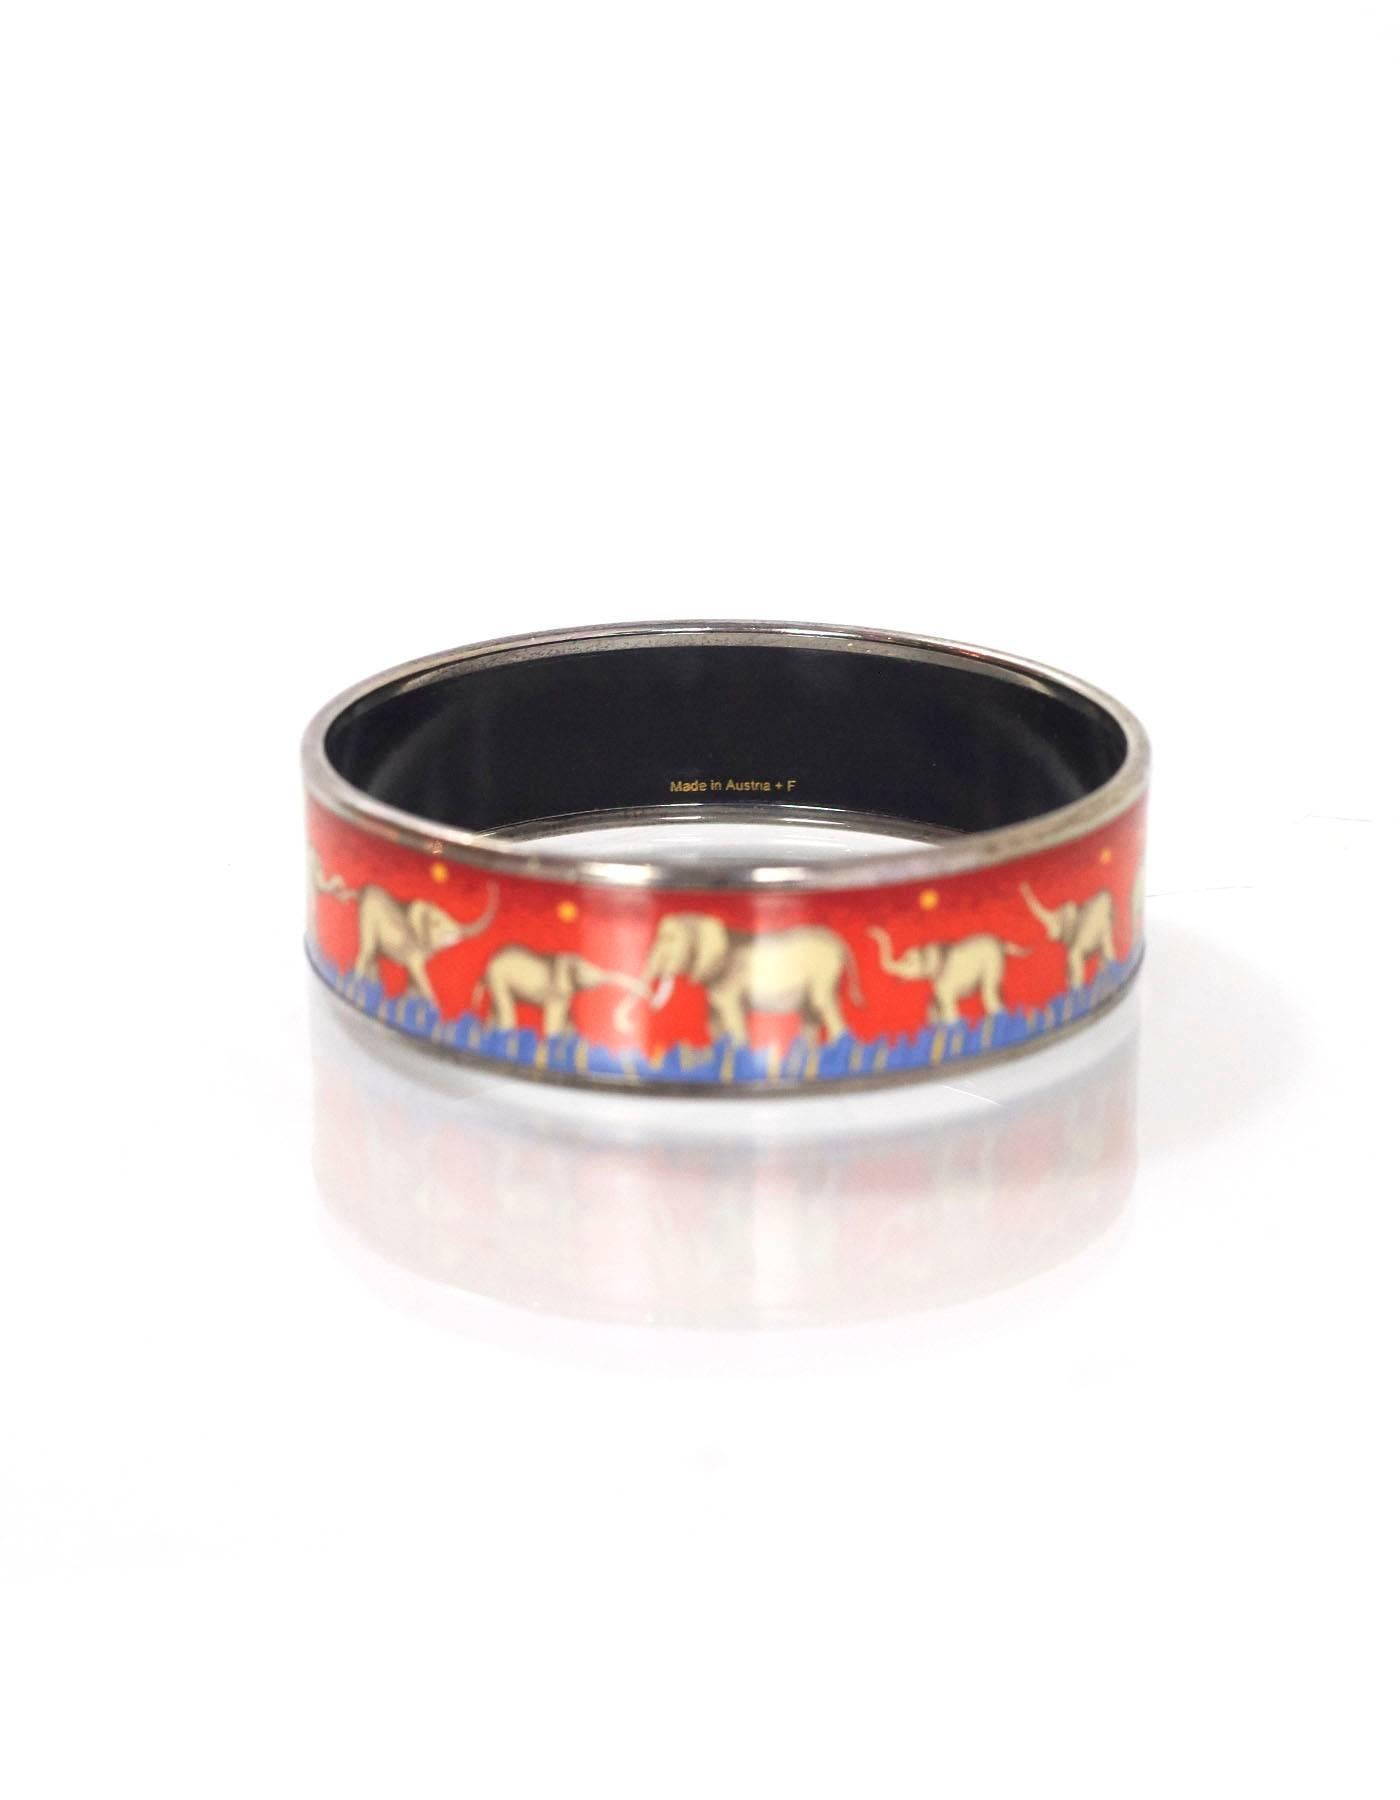 Hermes Elephant Enamel Bracelet Sz 65

Made In: Austria
Color: Red, blue
Hardware: Palladium
Materials: Enamel and metal
Closure: None
Stamp: Made in Austria + F
Overall Condition: Excellent good pre-owned condition with the exception of light